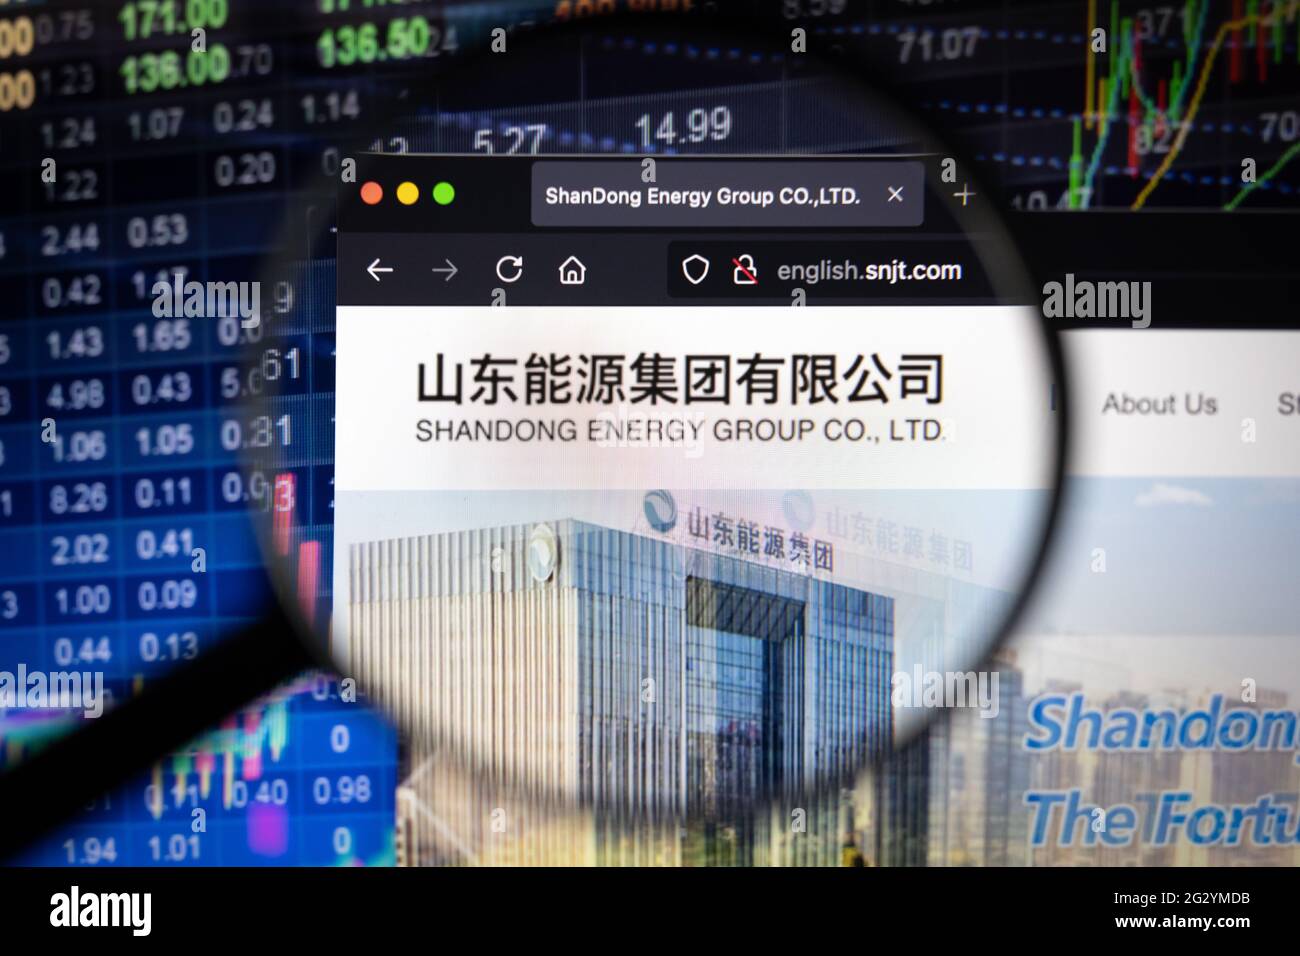 Shandong Energy company logo on a website with blurry stock market developments in the background, seen on a computer screen Stock Photo